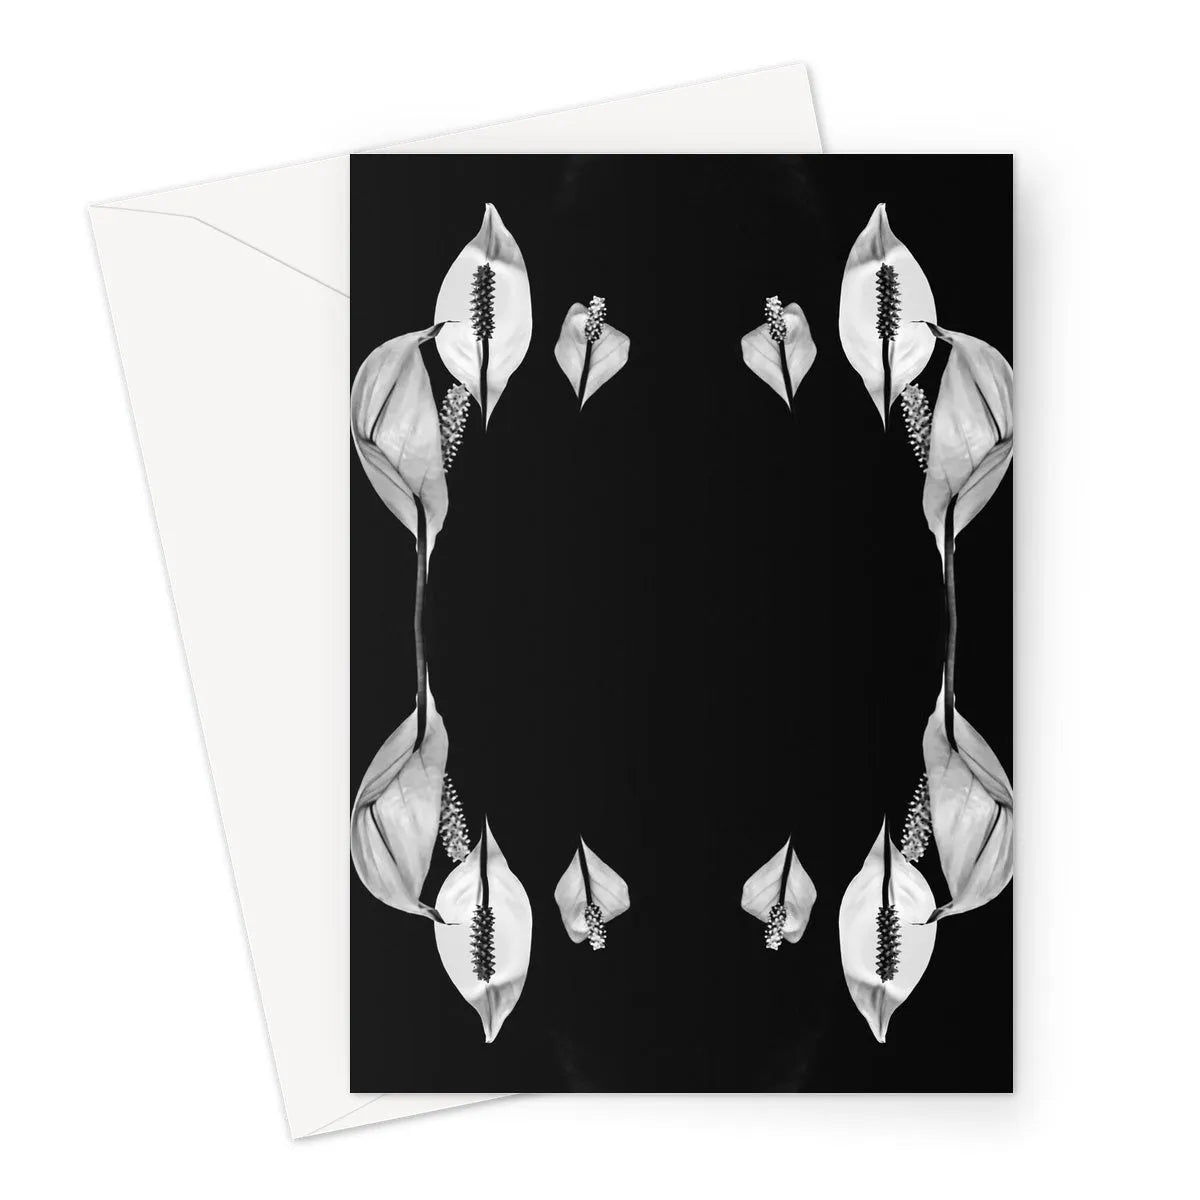 Pearly Whites Greeting Card - A5 Portrait / 10 Cards - Greeting & Note Cards - Aesthetic Art